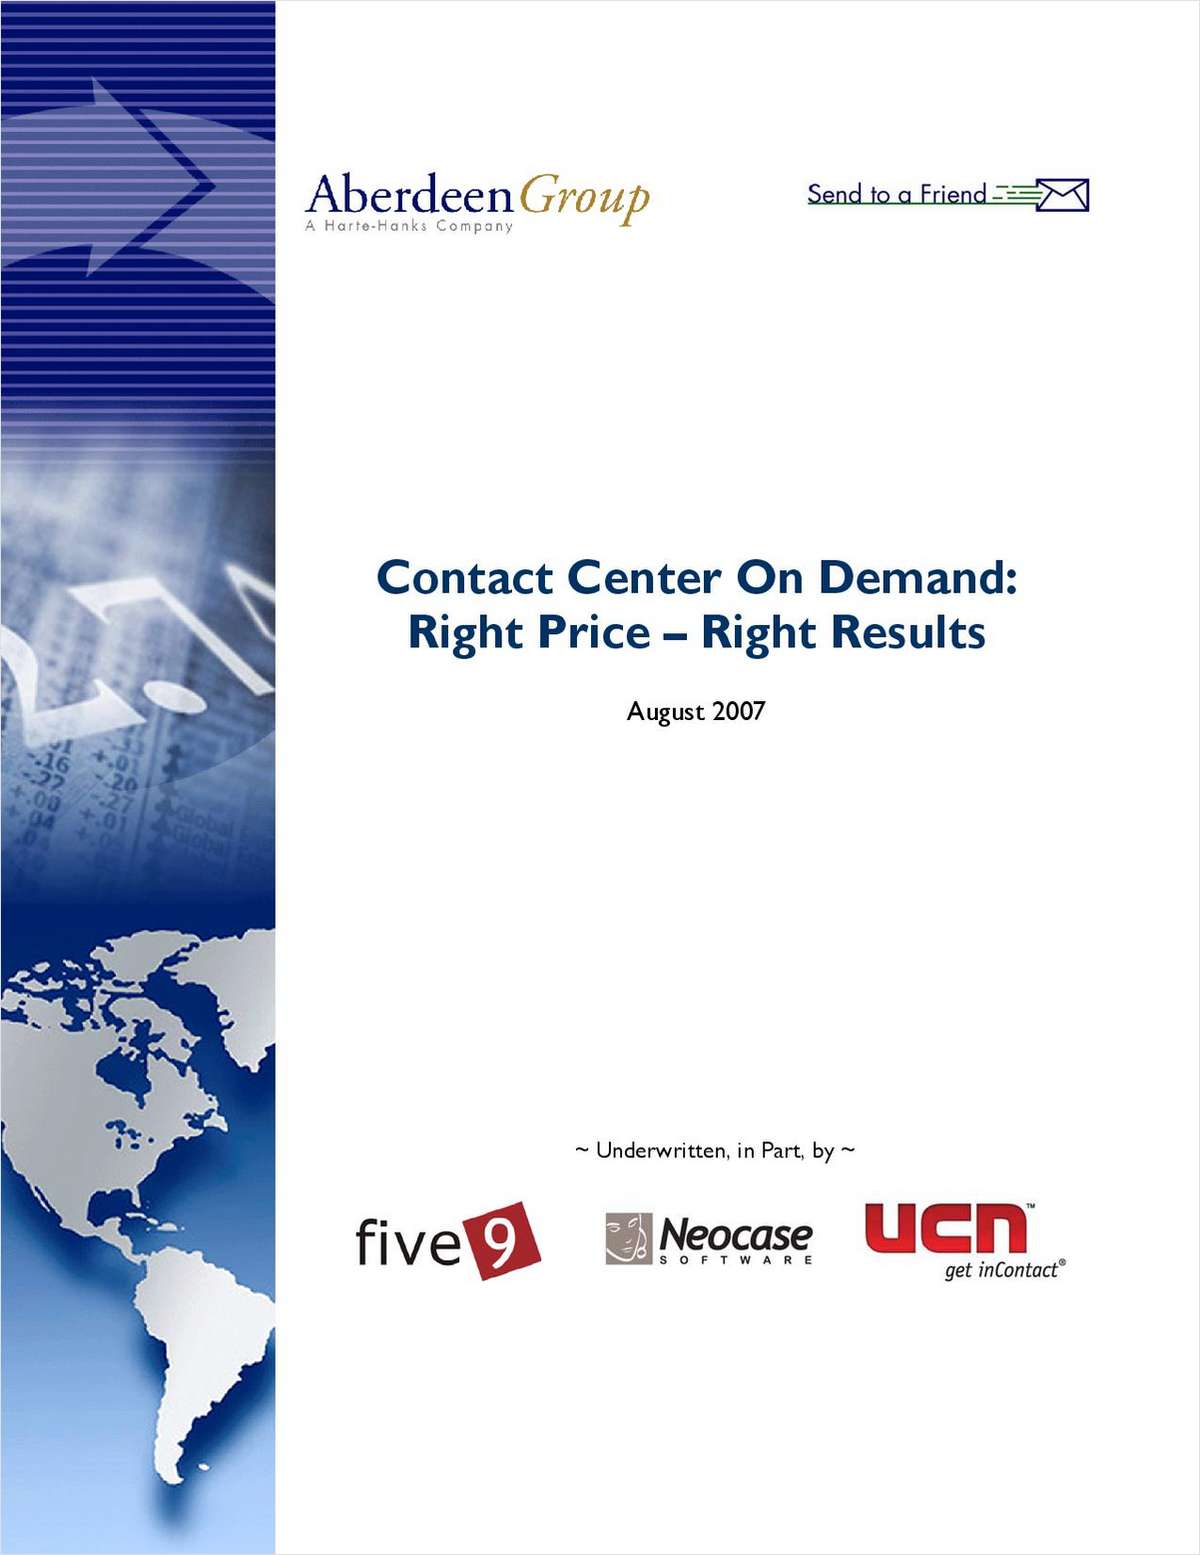 Contact Center On Demand: Right Price – Right Results